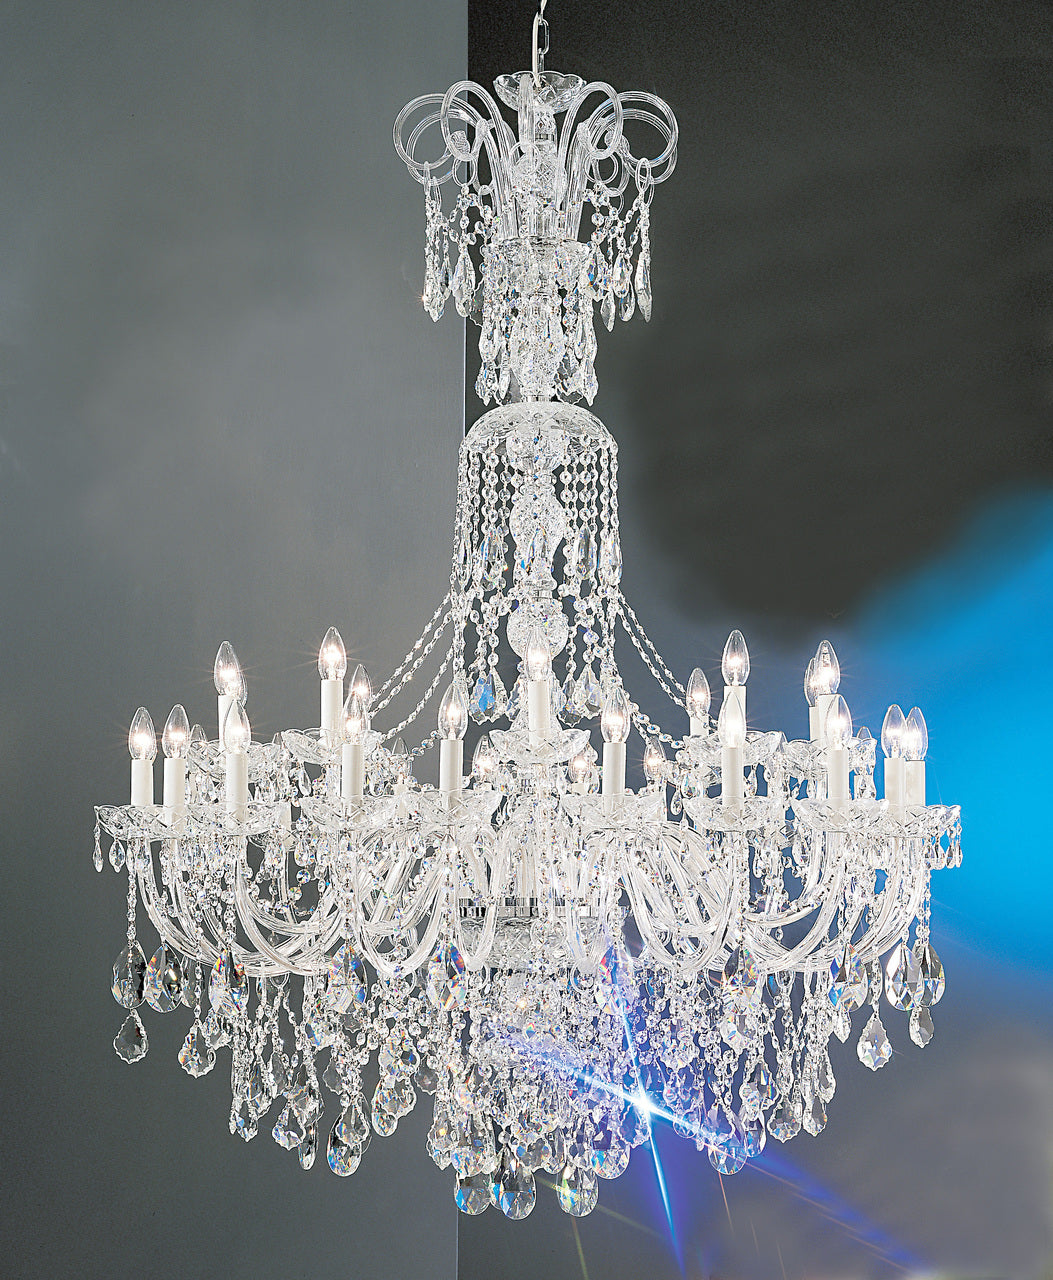 Classic Lighting 8264 G S Bohemia Crystal/Glass Chandelier in 24k Gold (Imported from Italy)